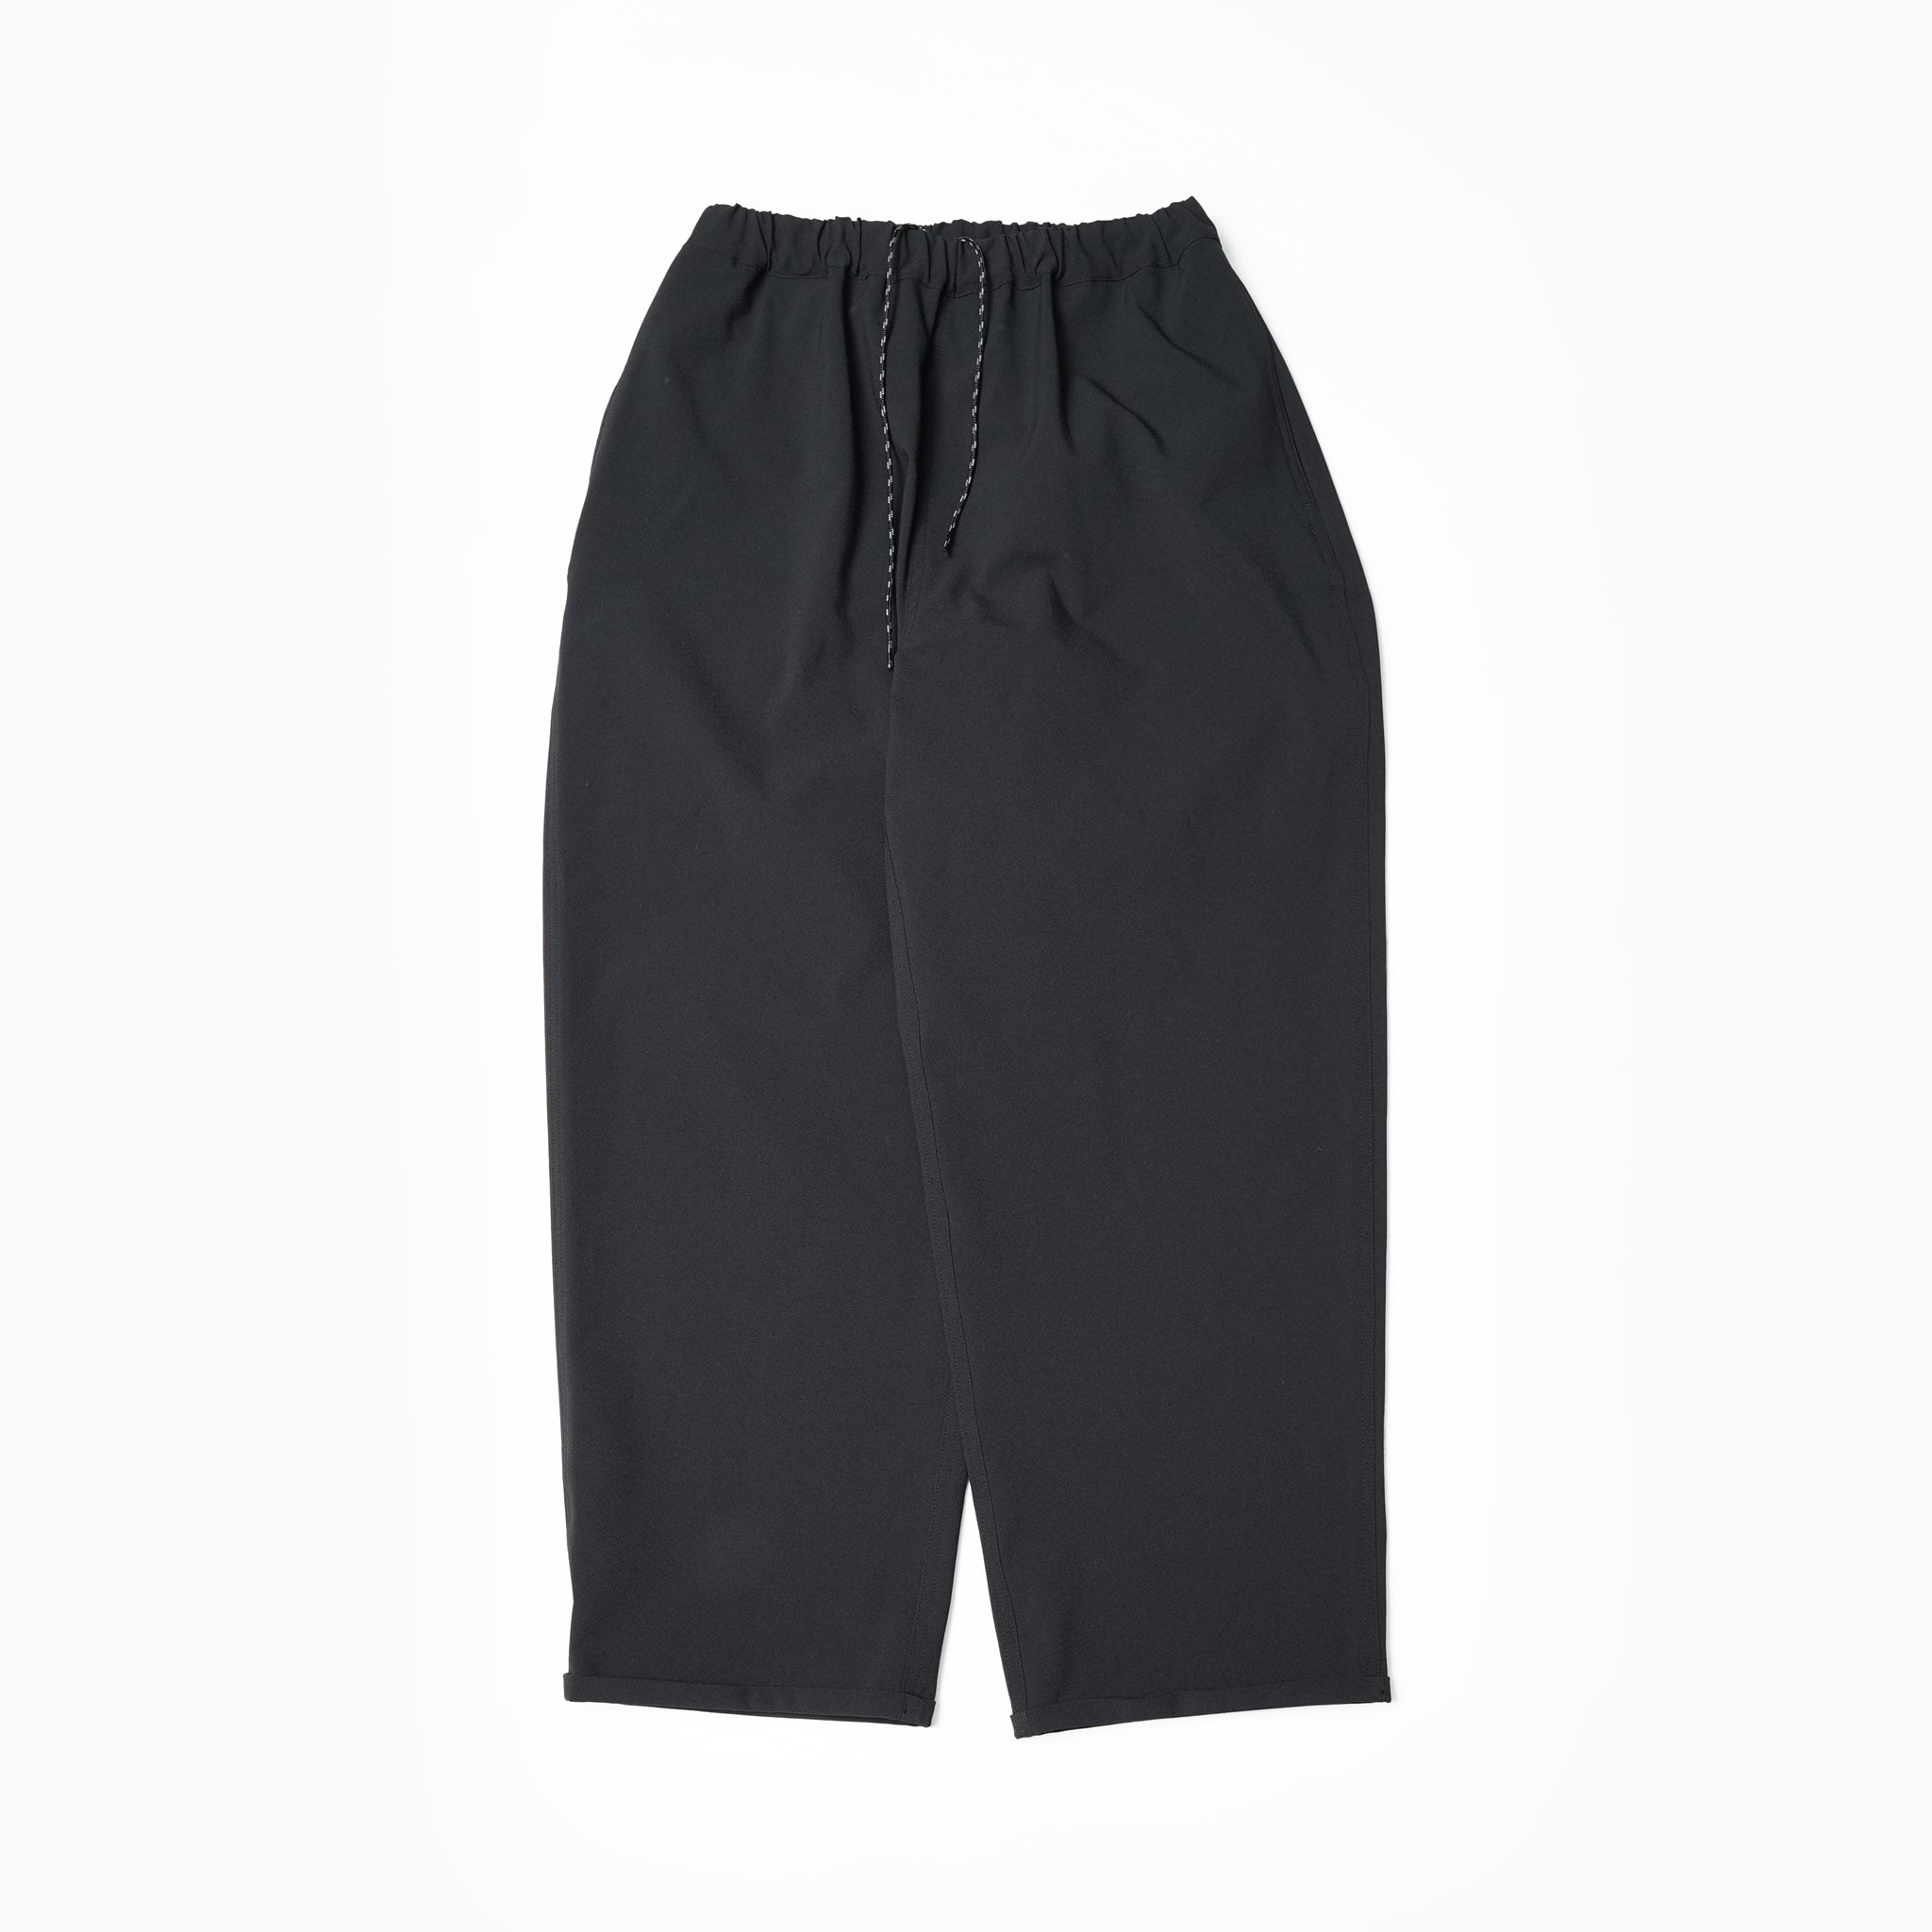 No:PH24FW-001_Black | Name:P.H. M.EASY PANTS | Color:Black【POWDERHORN MOUNTAINEERING_パウダーホーンマウンテニアリング】【入荷予定アイテム・入荷連絡可能】